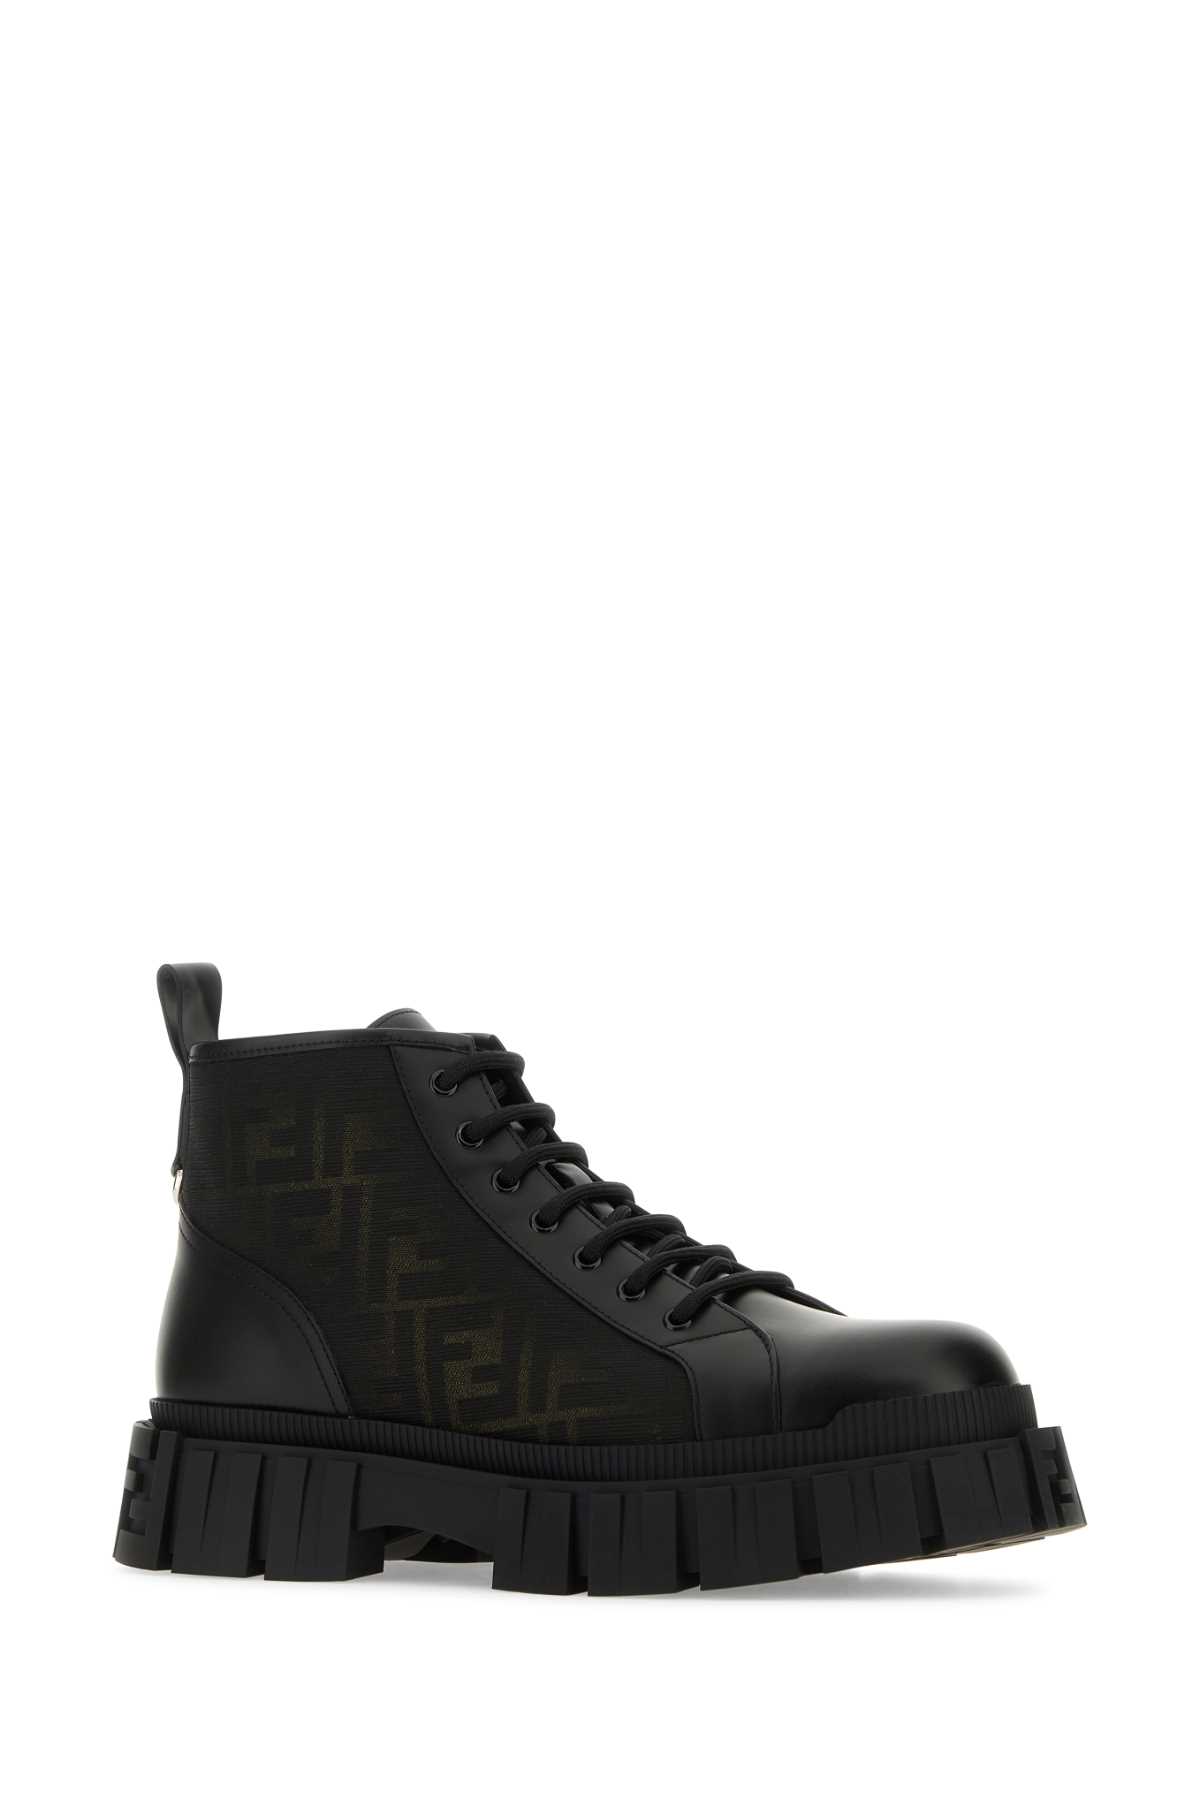 FENDI TWO-TONE LEATHER AND FABRIC FENDI FORCE ANKLE BOOTS